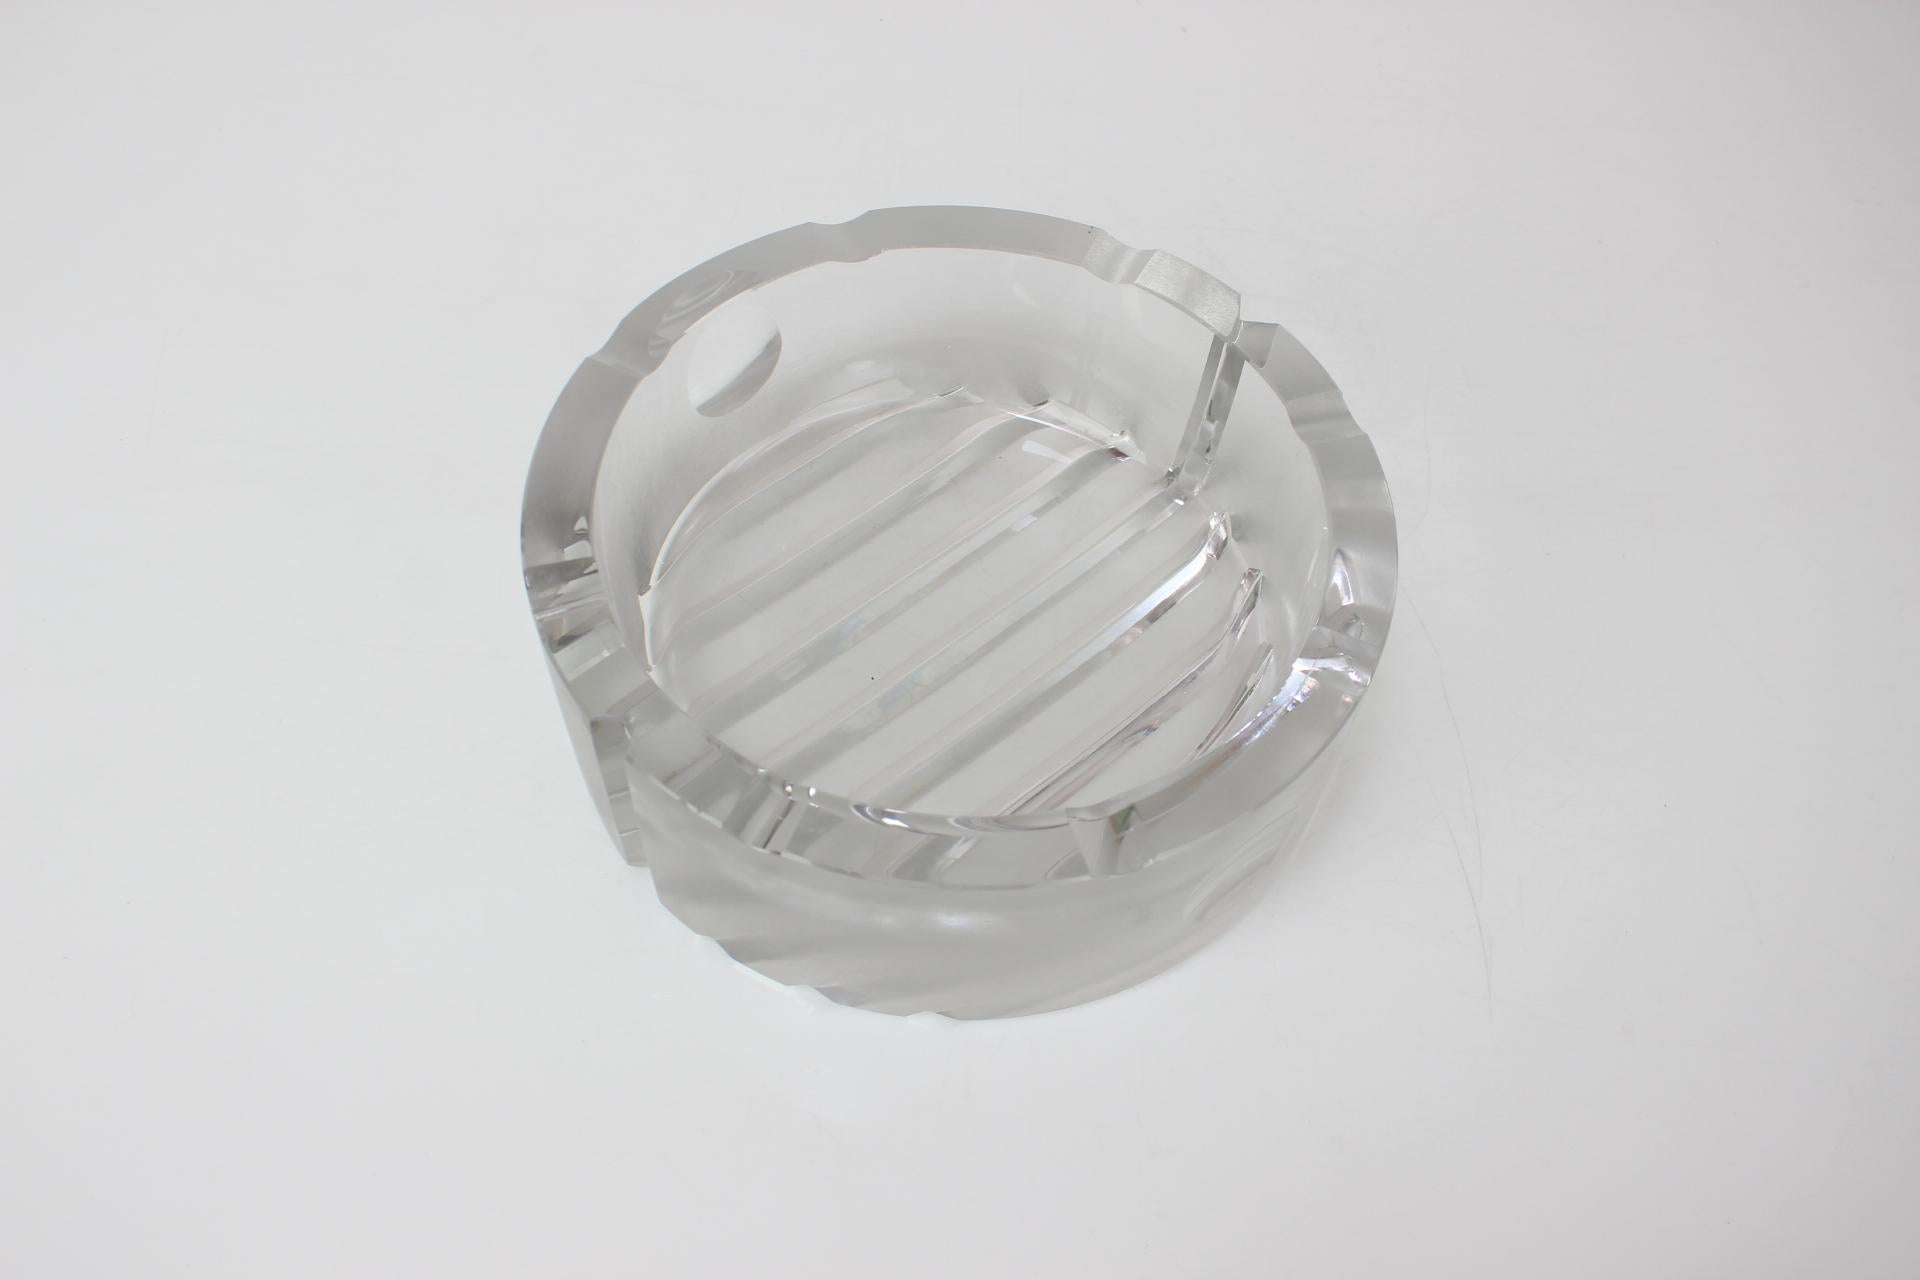 Czech Mid-Century Big Ashtray by Bohemia Glass, 1970's For Sale